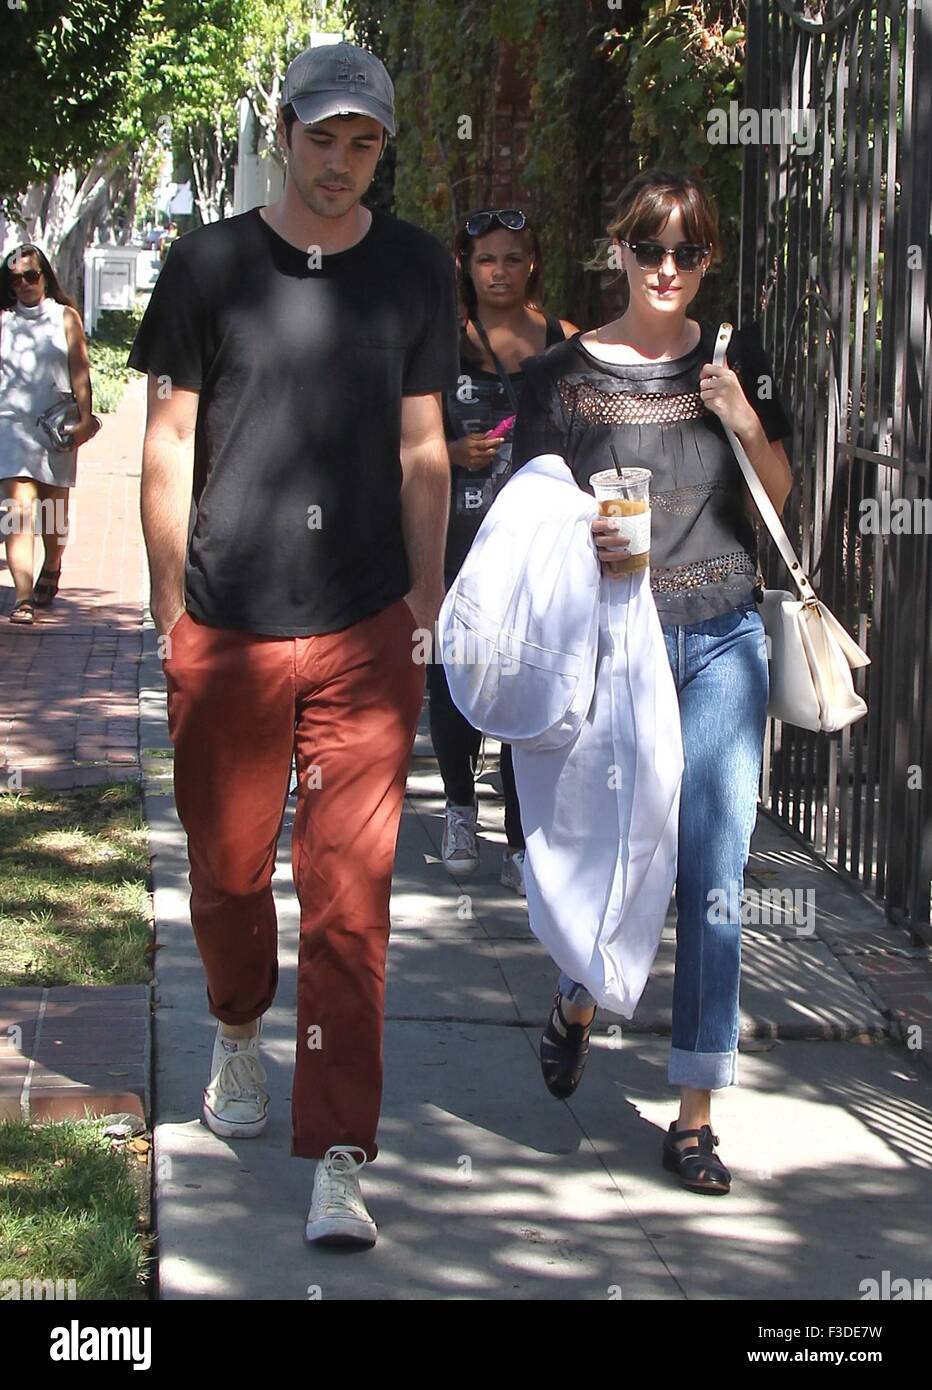 Fifty Shades of Grey' star Dakota Johnson, out and about in turn up jeans  and carrying a drink Featuring: Dakota Johnson Where: Los Angeles When: 04  Aug 2015 Stock Photo - Alamy